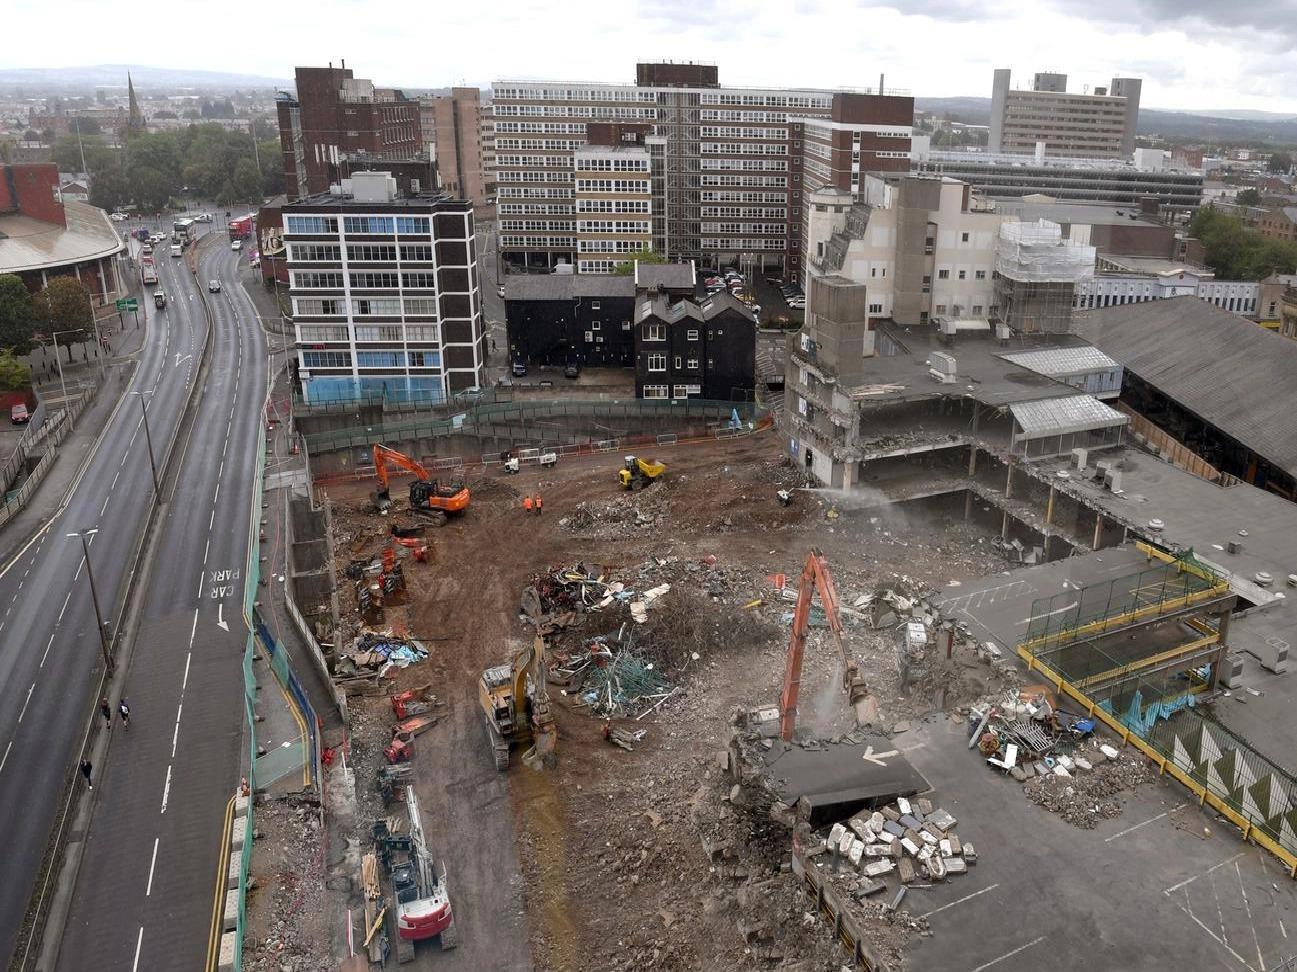 Demolition of Preston's indoor market hall, which had stood proudly in the city since 1973, began on July 15, 2018. Acinema, leisure complex, andmodern multi storey car park is planned for the site.